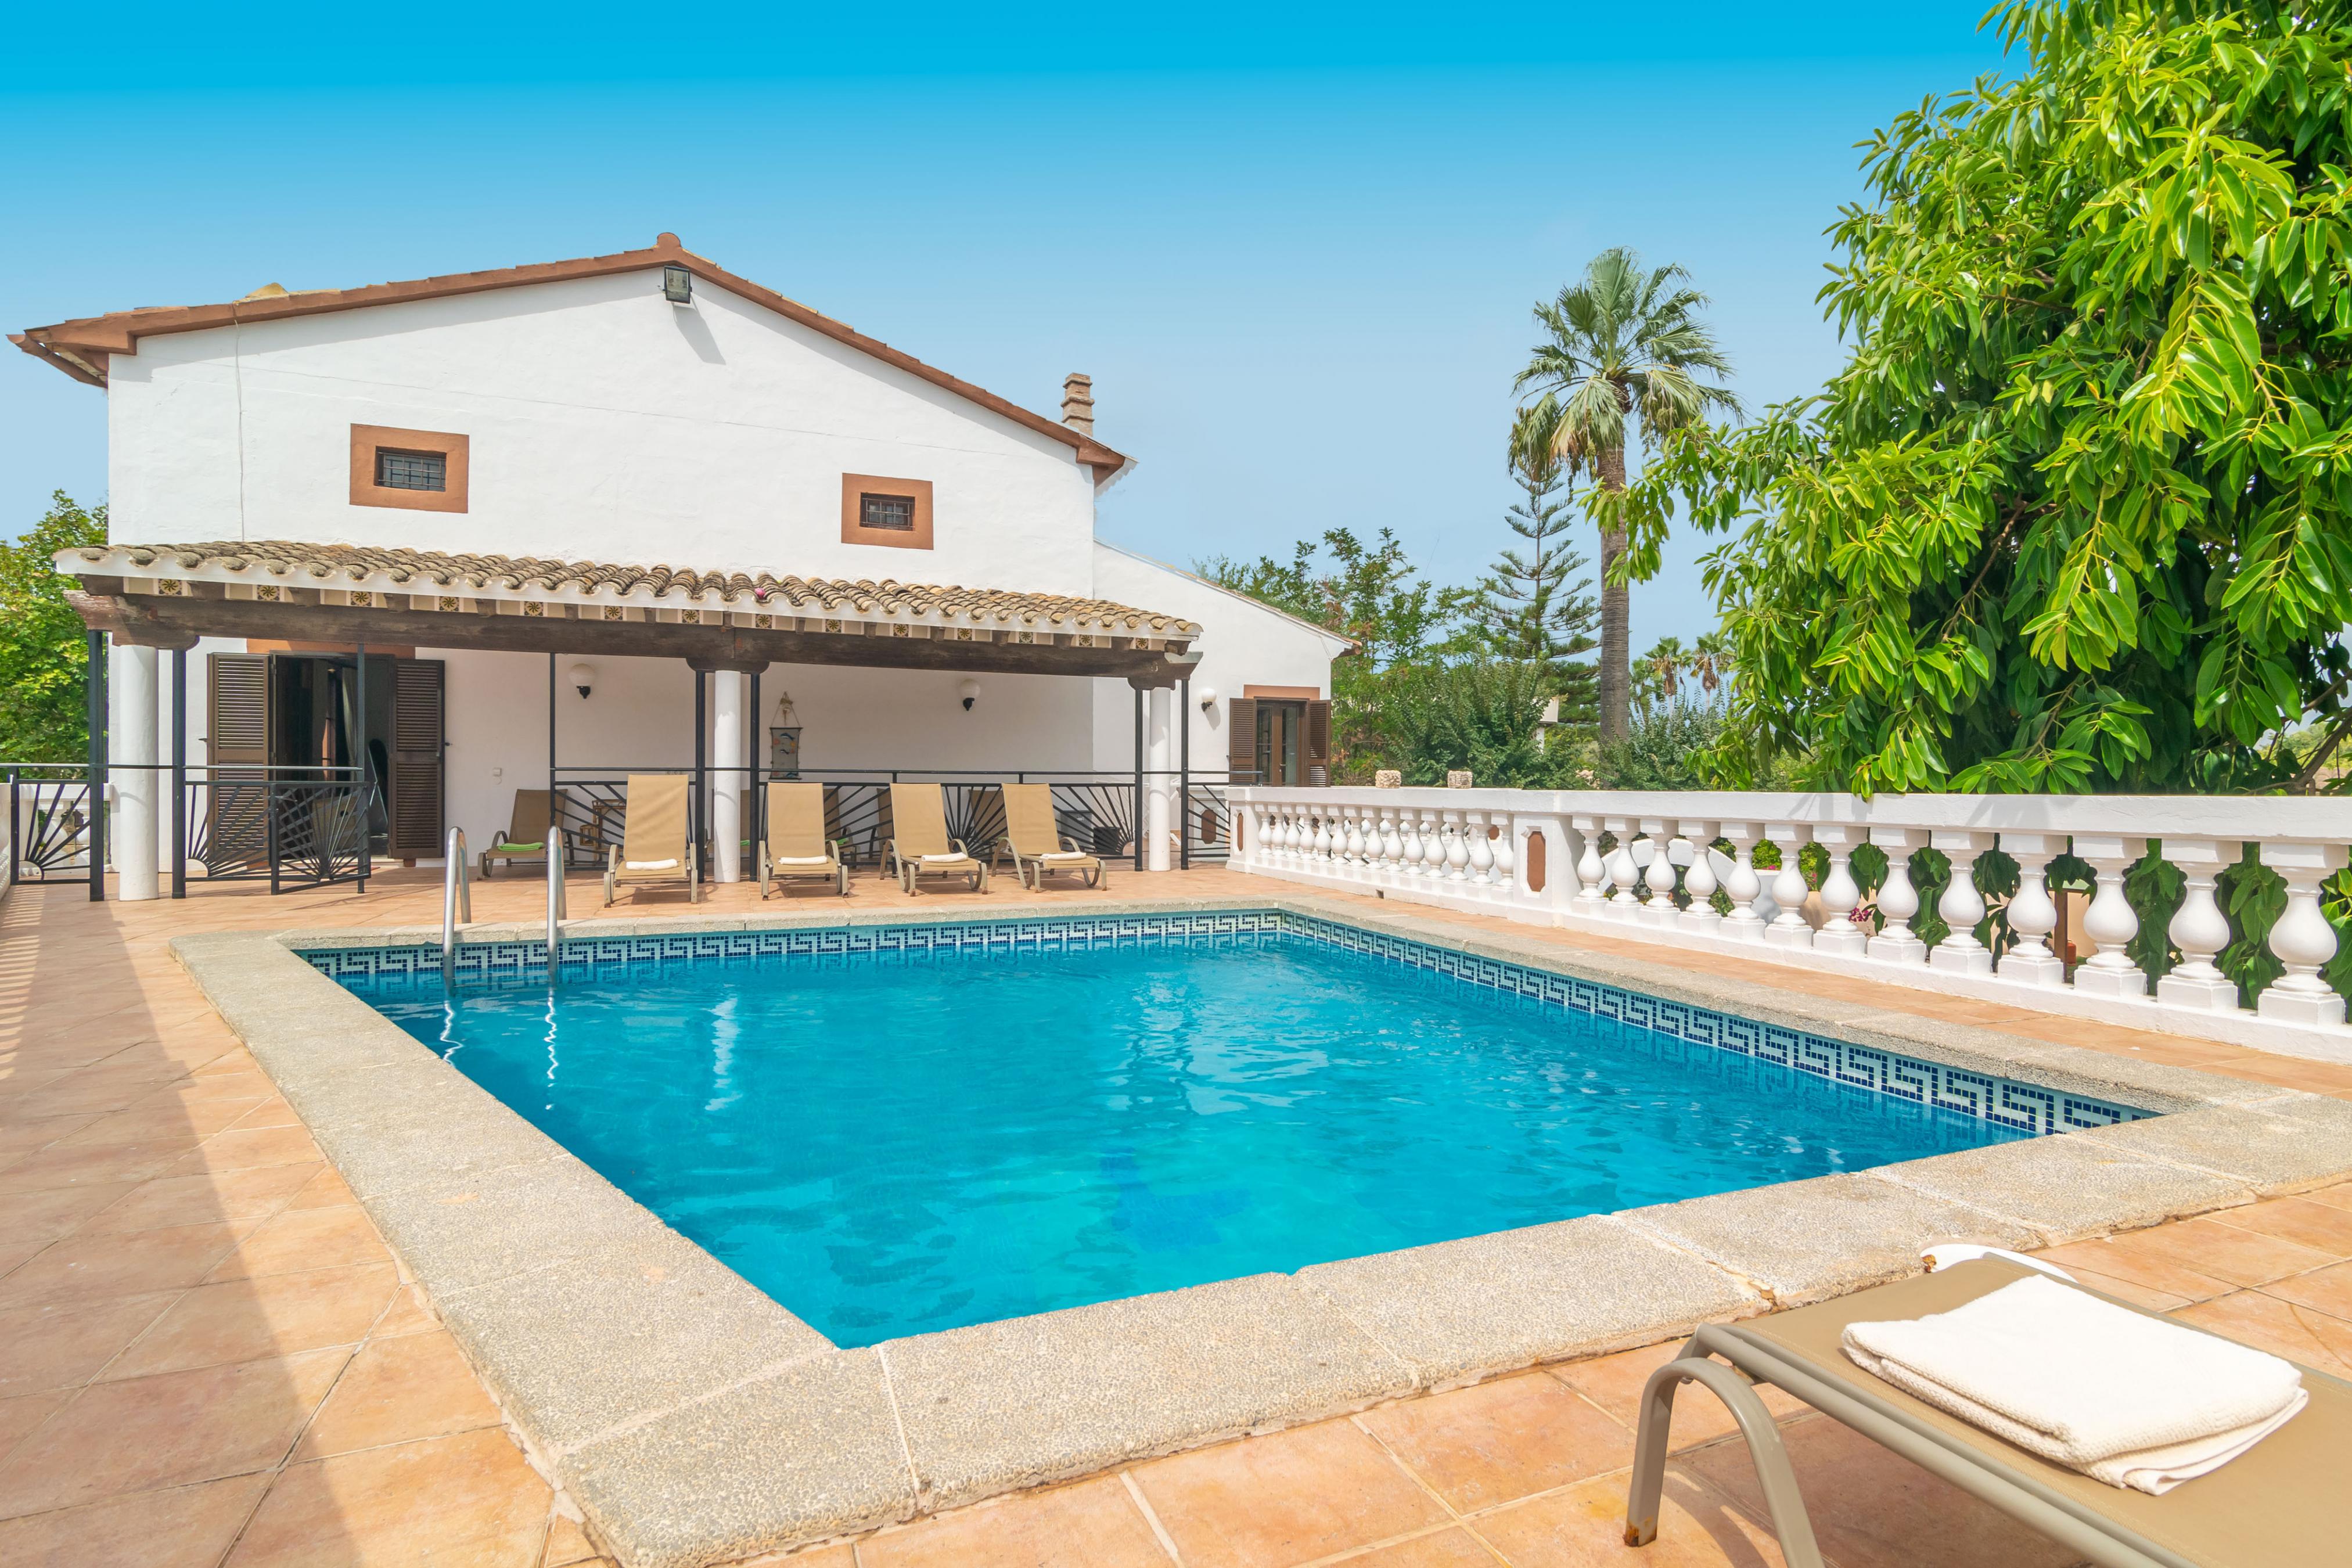 Property Image 1 - ES MOLI DELS REIS - Fantastic house with private pool in Palma. Free Wi-Fi